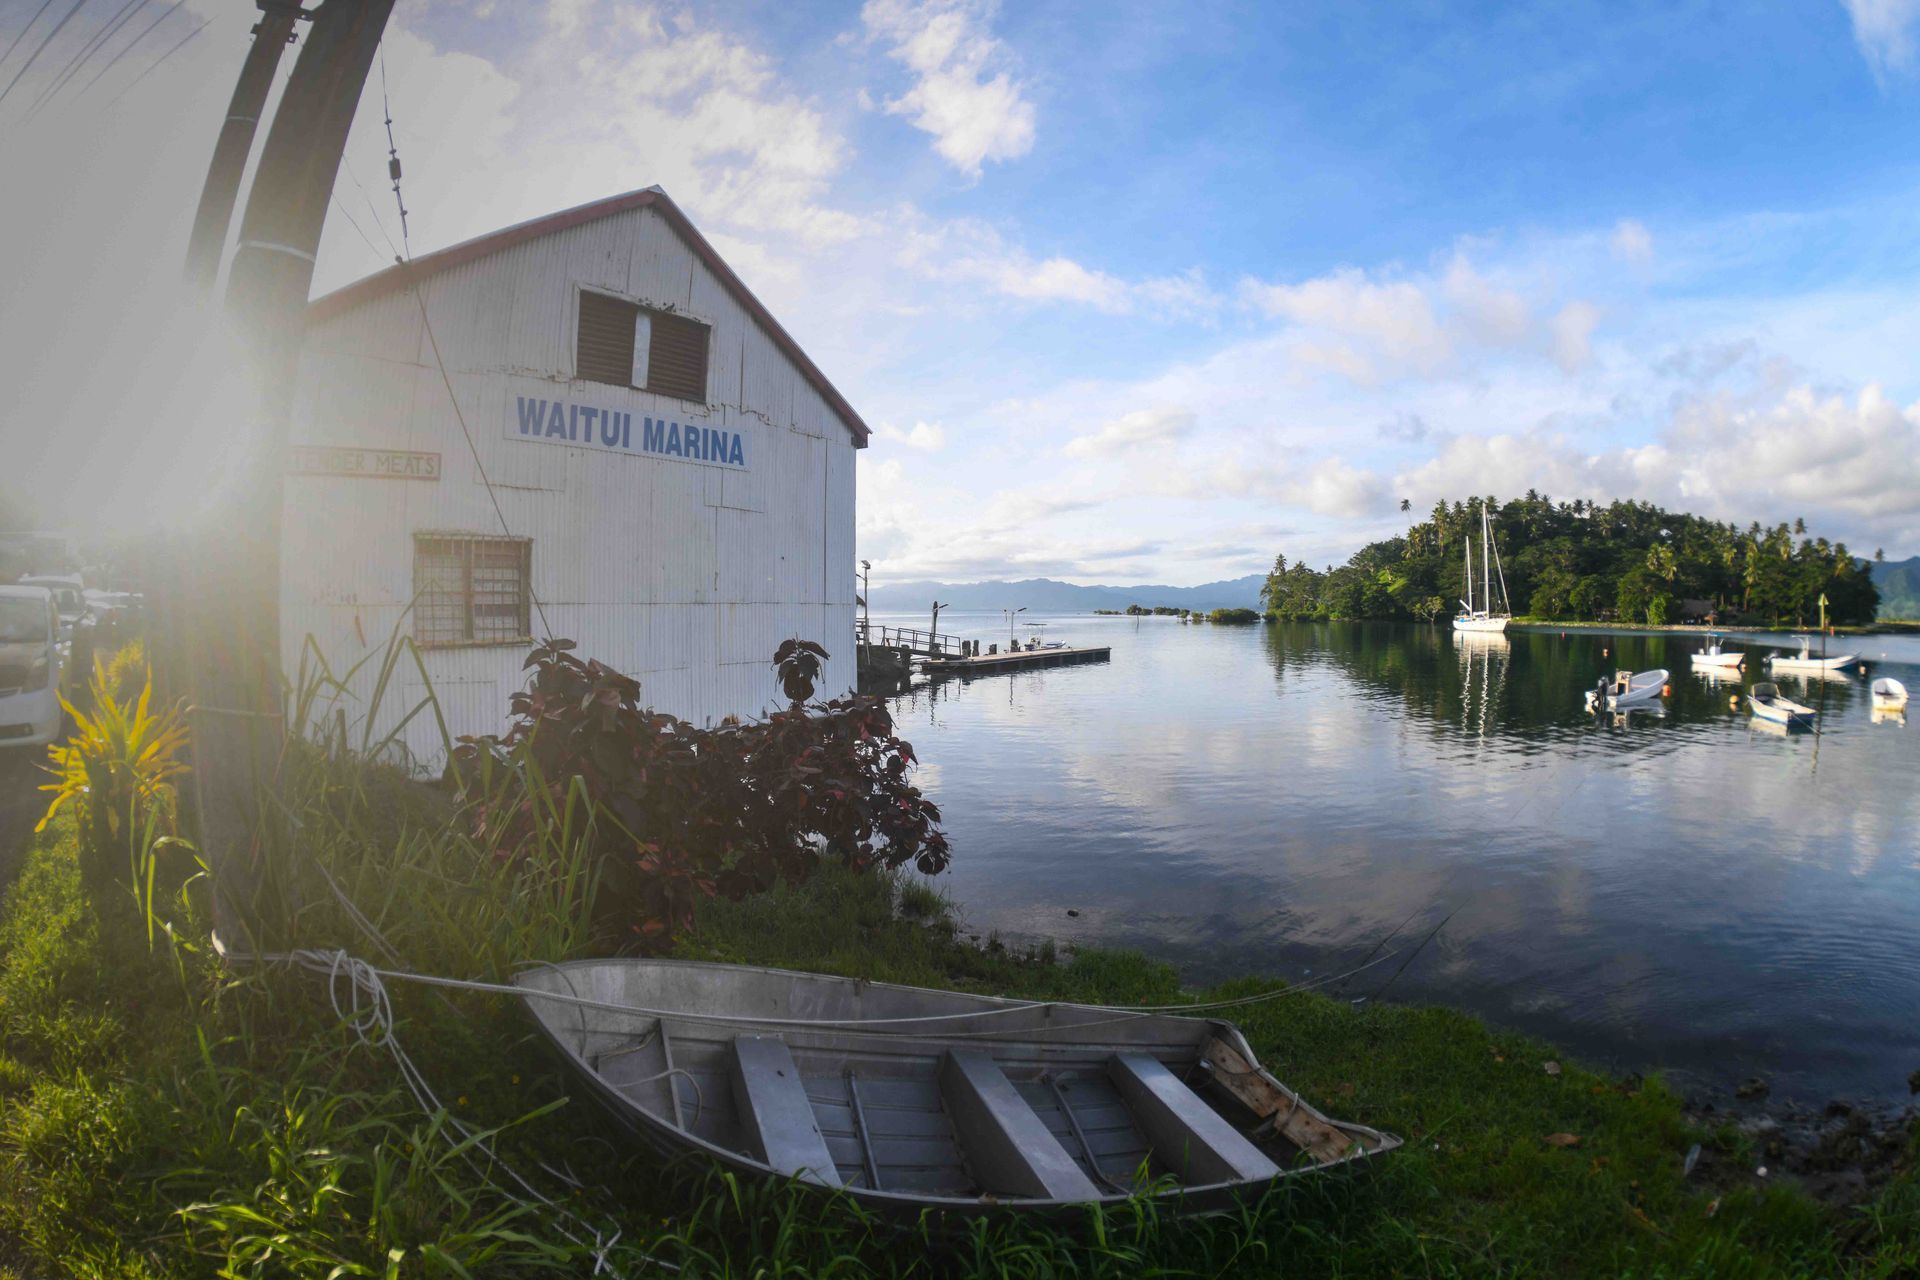 The Watui marina , part of the authentic Fiji that can be seen in Savusavu